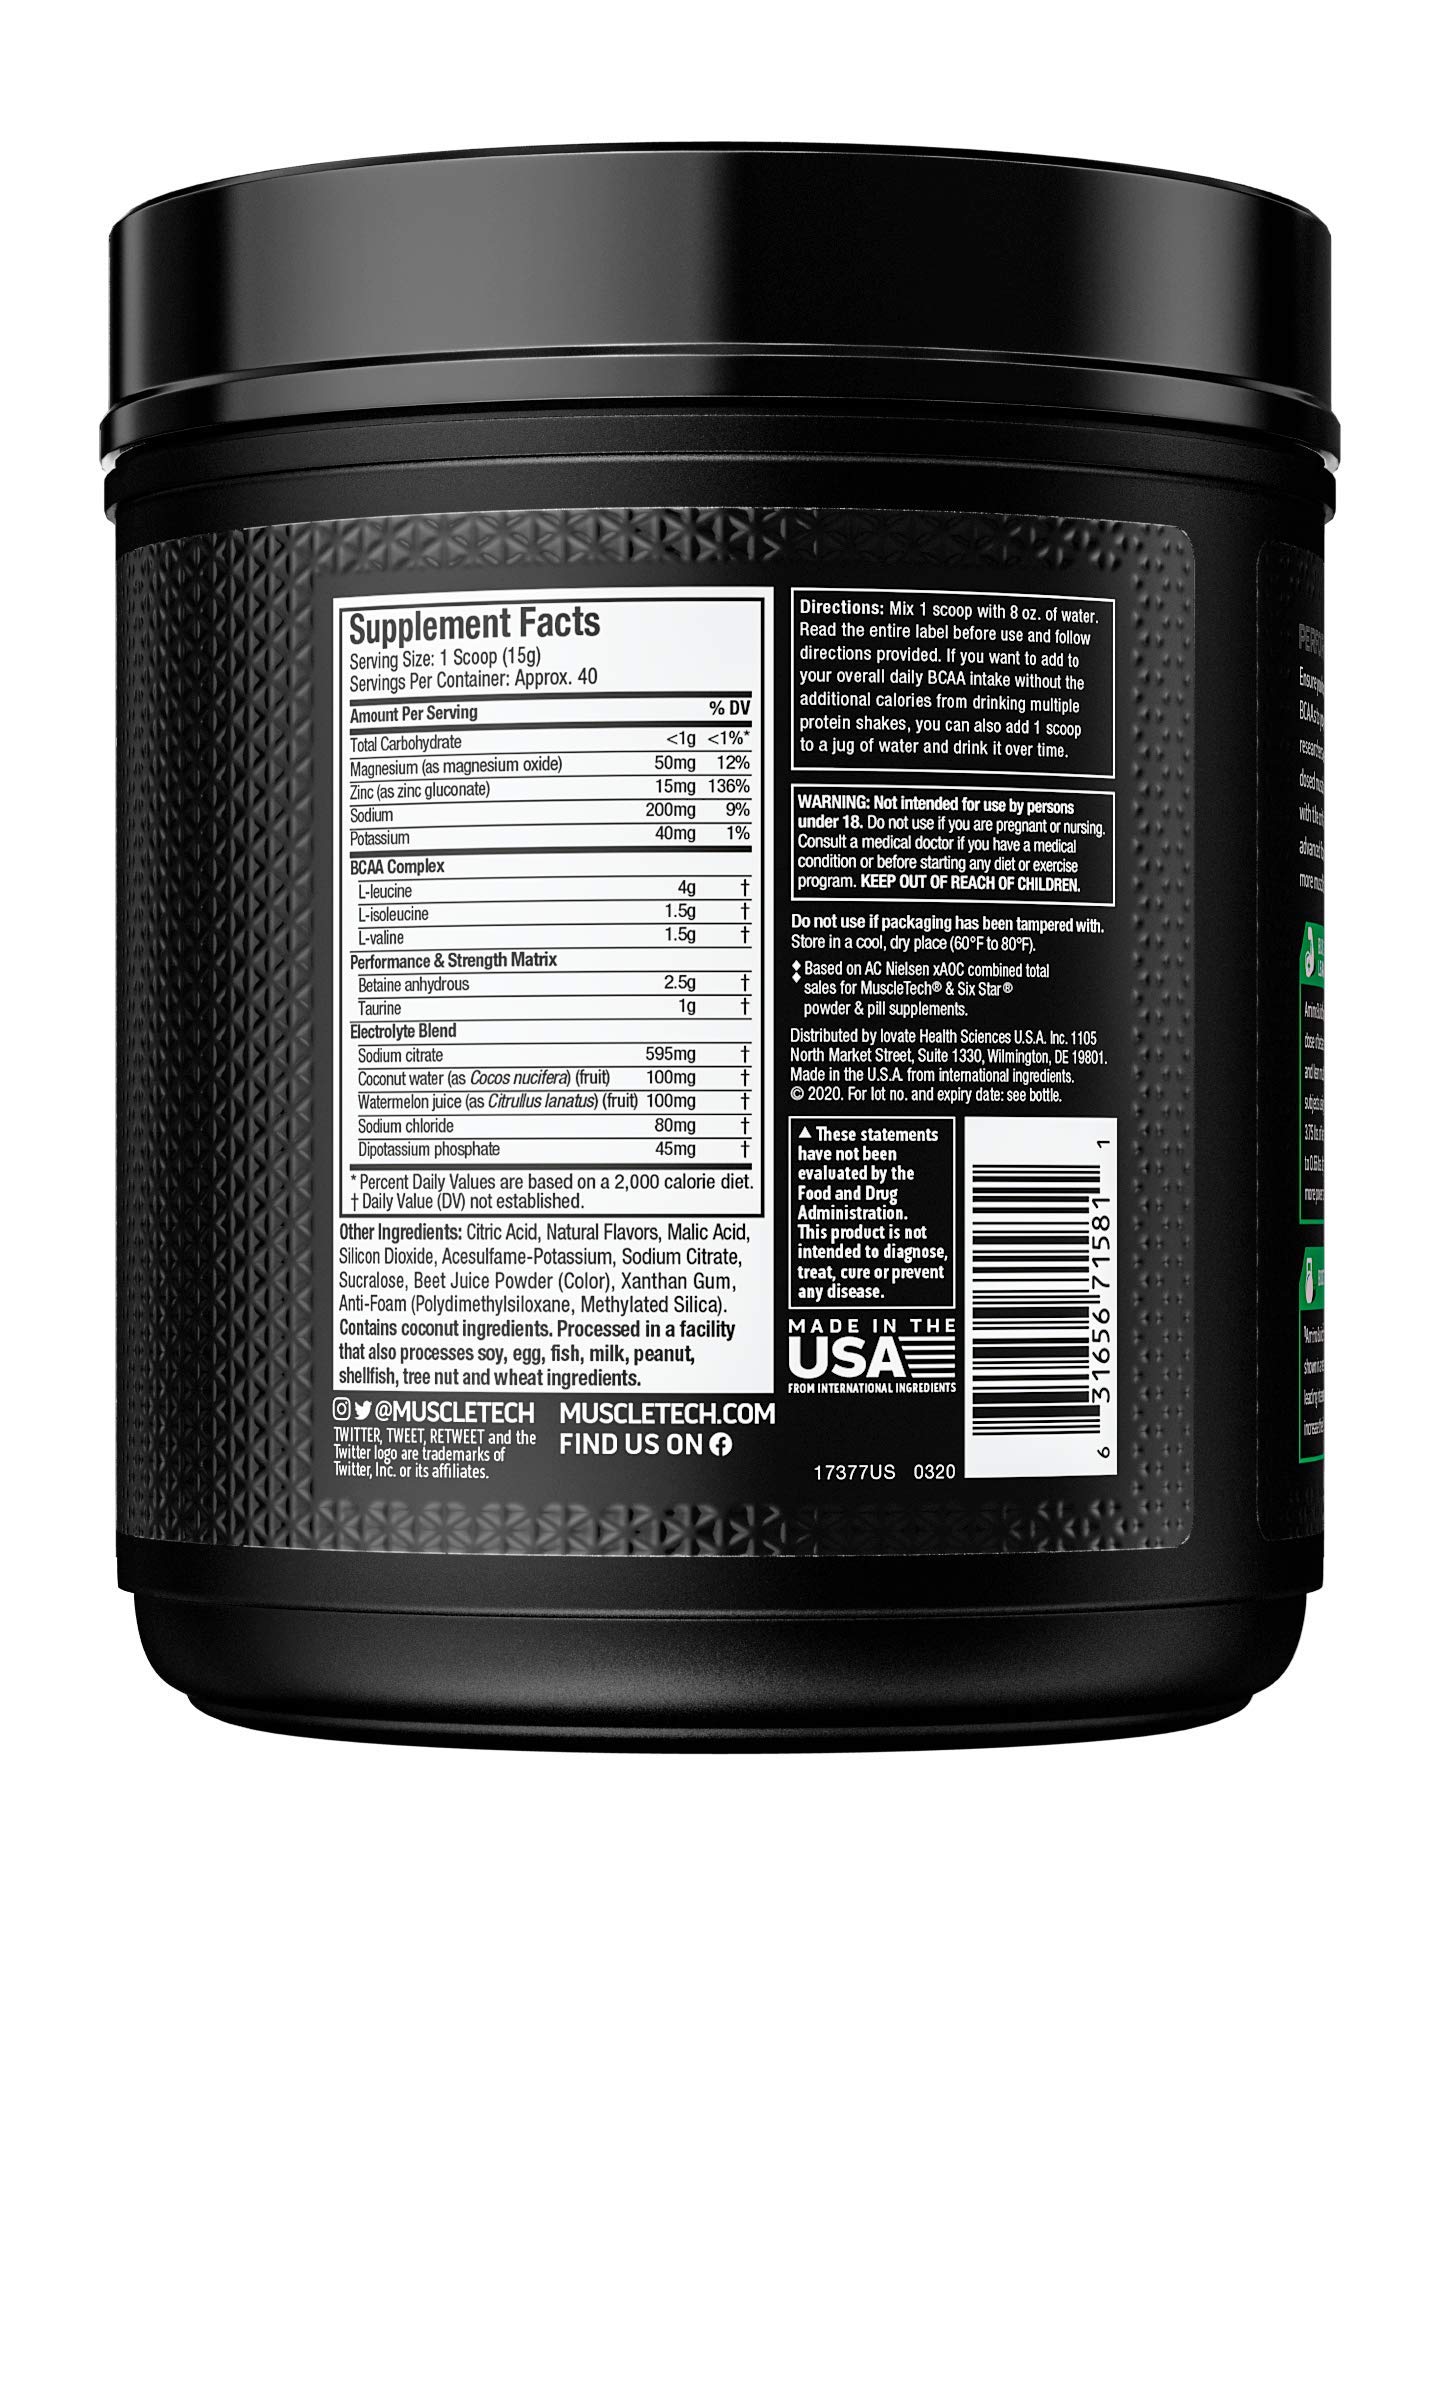 BCAA Amino Acids + Electrolyte Powder MuscleTech Amino Build 7g of BCAAs + Electrolytes Support Muscle Recovery, Build Lean Muscle & Boost Endurance Strawberry Watermelon (40 Servings)